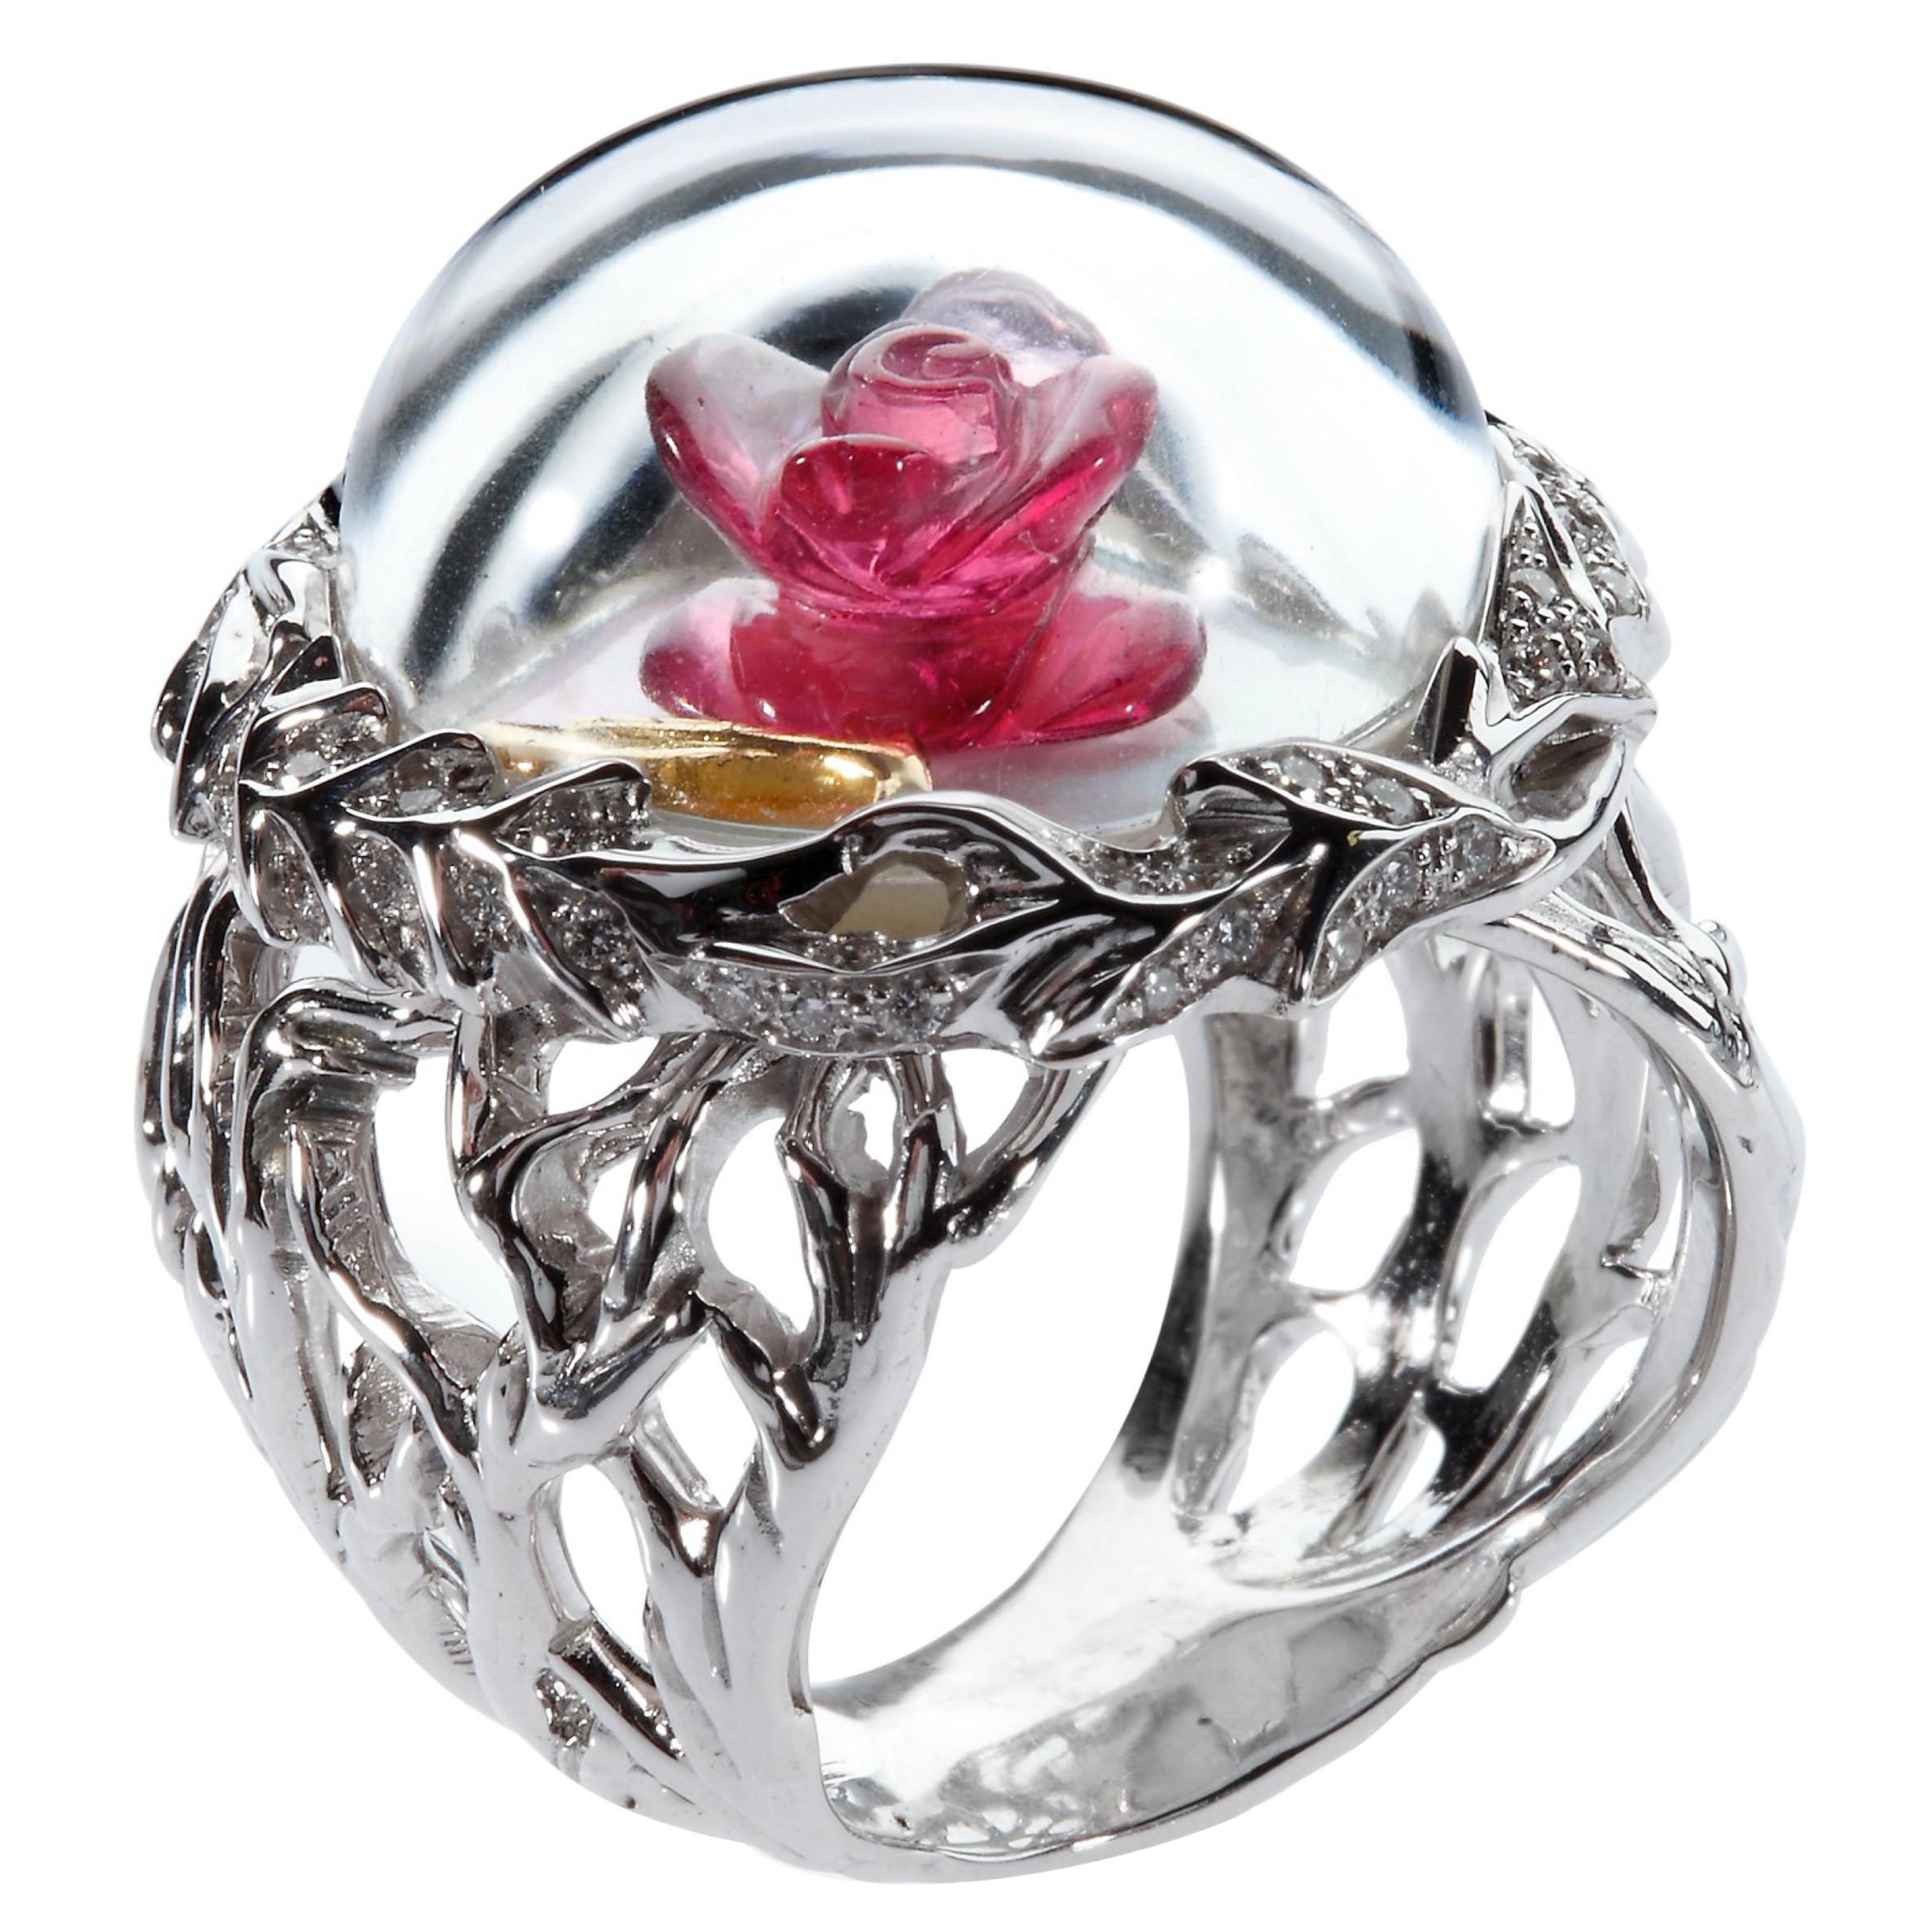 Rubellite Rose in Rock Crystal Dome, Diamonds and 18K White Gold Ring by Édéenne For Sale